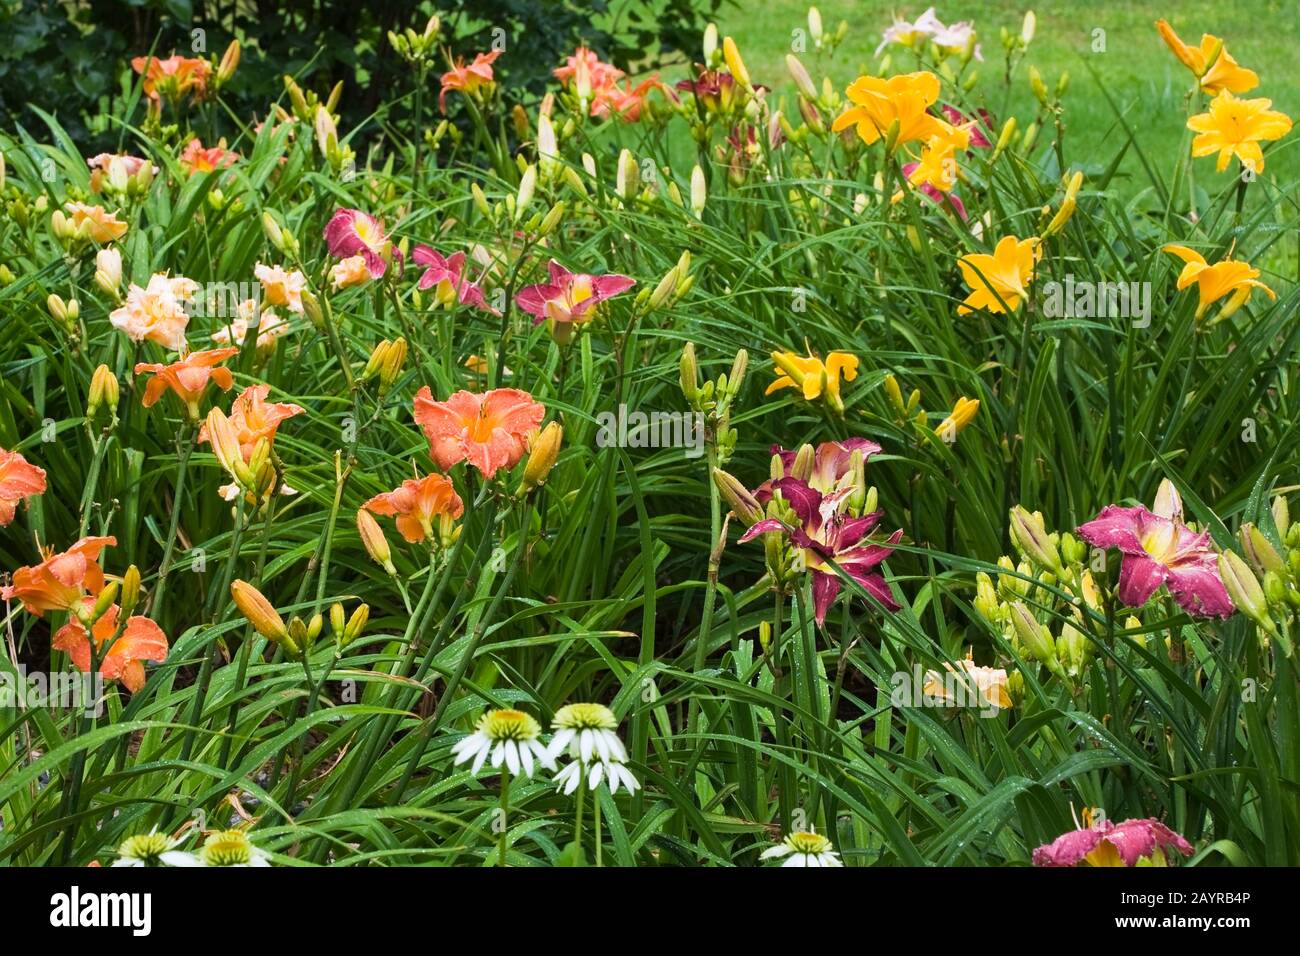 Orange, purple and yellow Hemerocallis - Daylily flowers in border after rainfall in backyard country garden in summer. Stock Photo